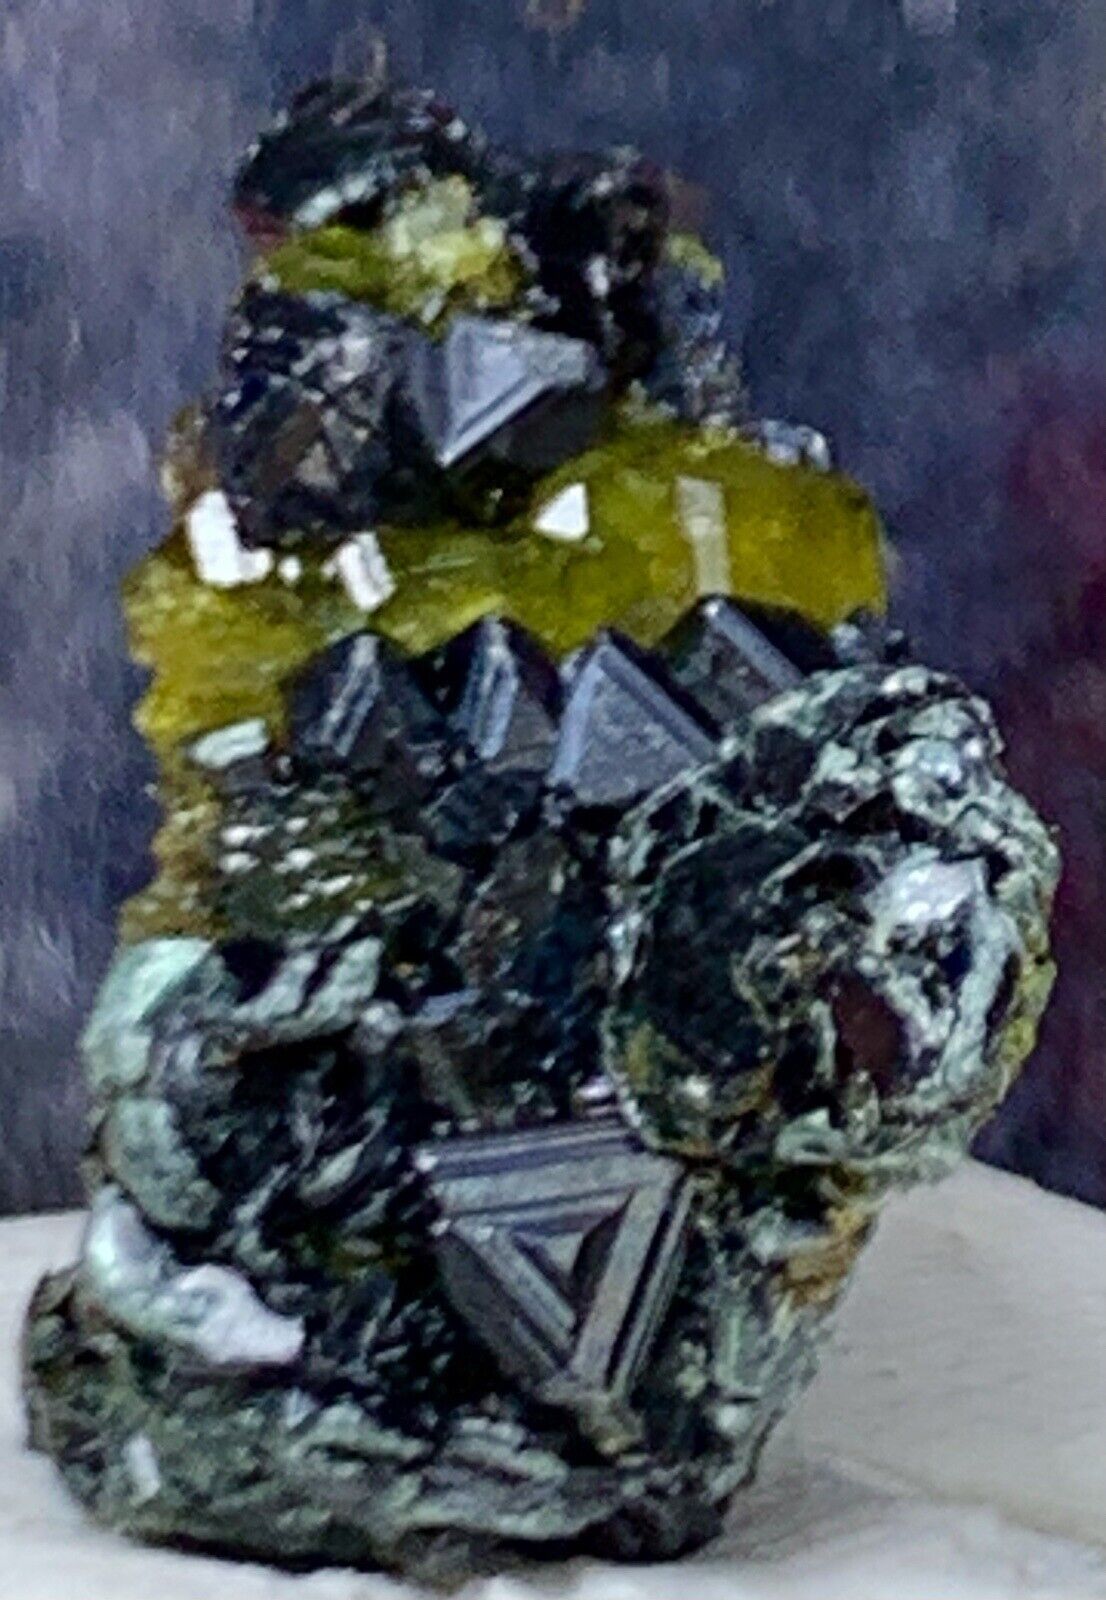 14 Carats very beautiful magnetite crystals combined with Diapside And Mica